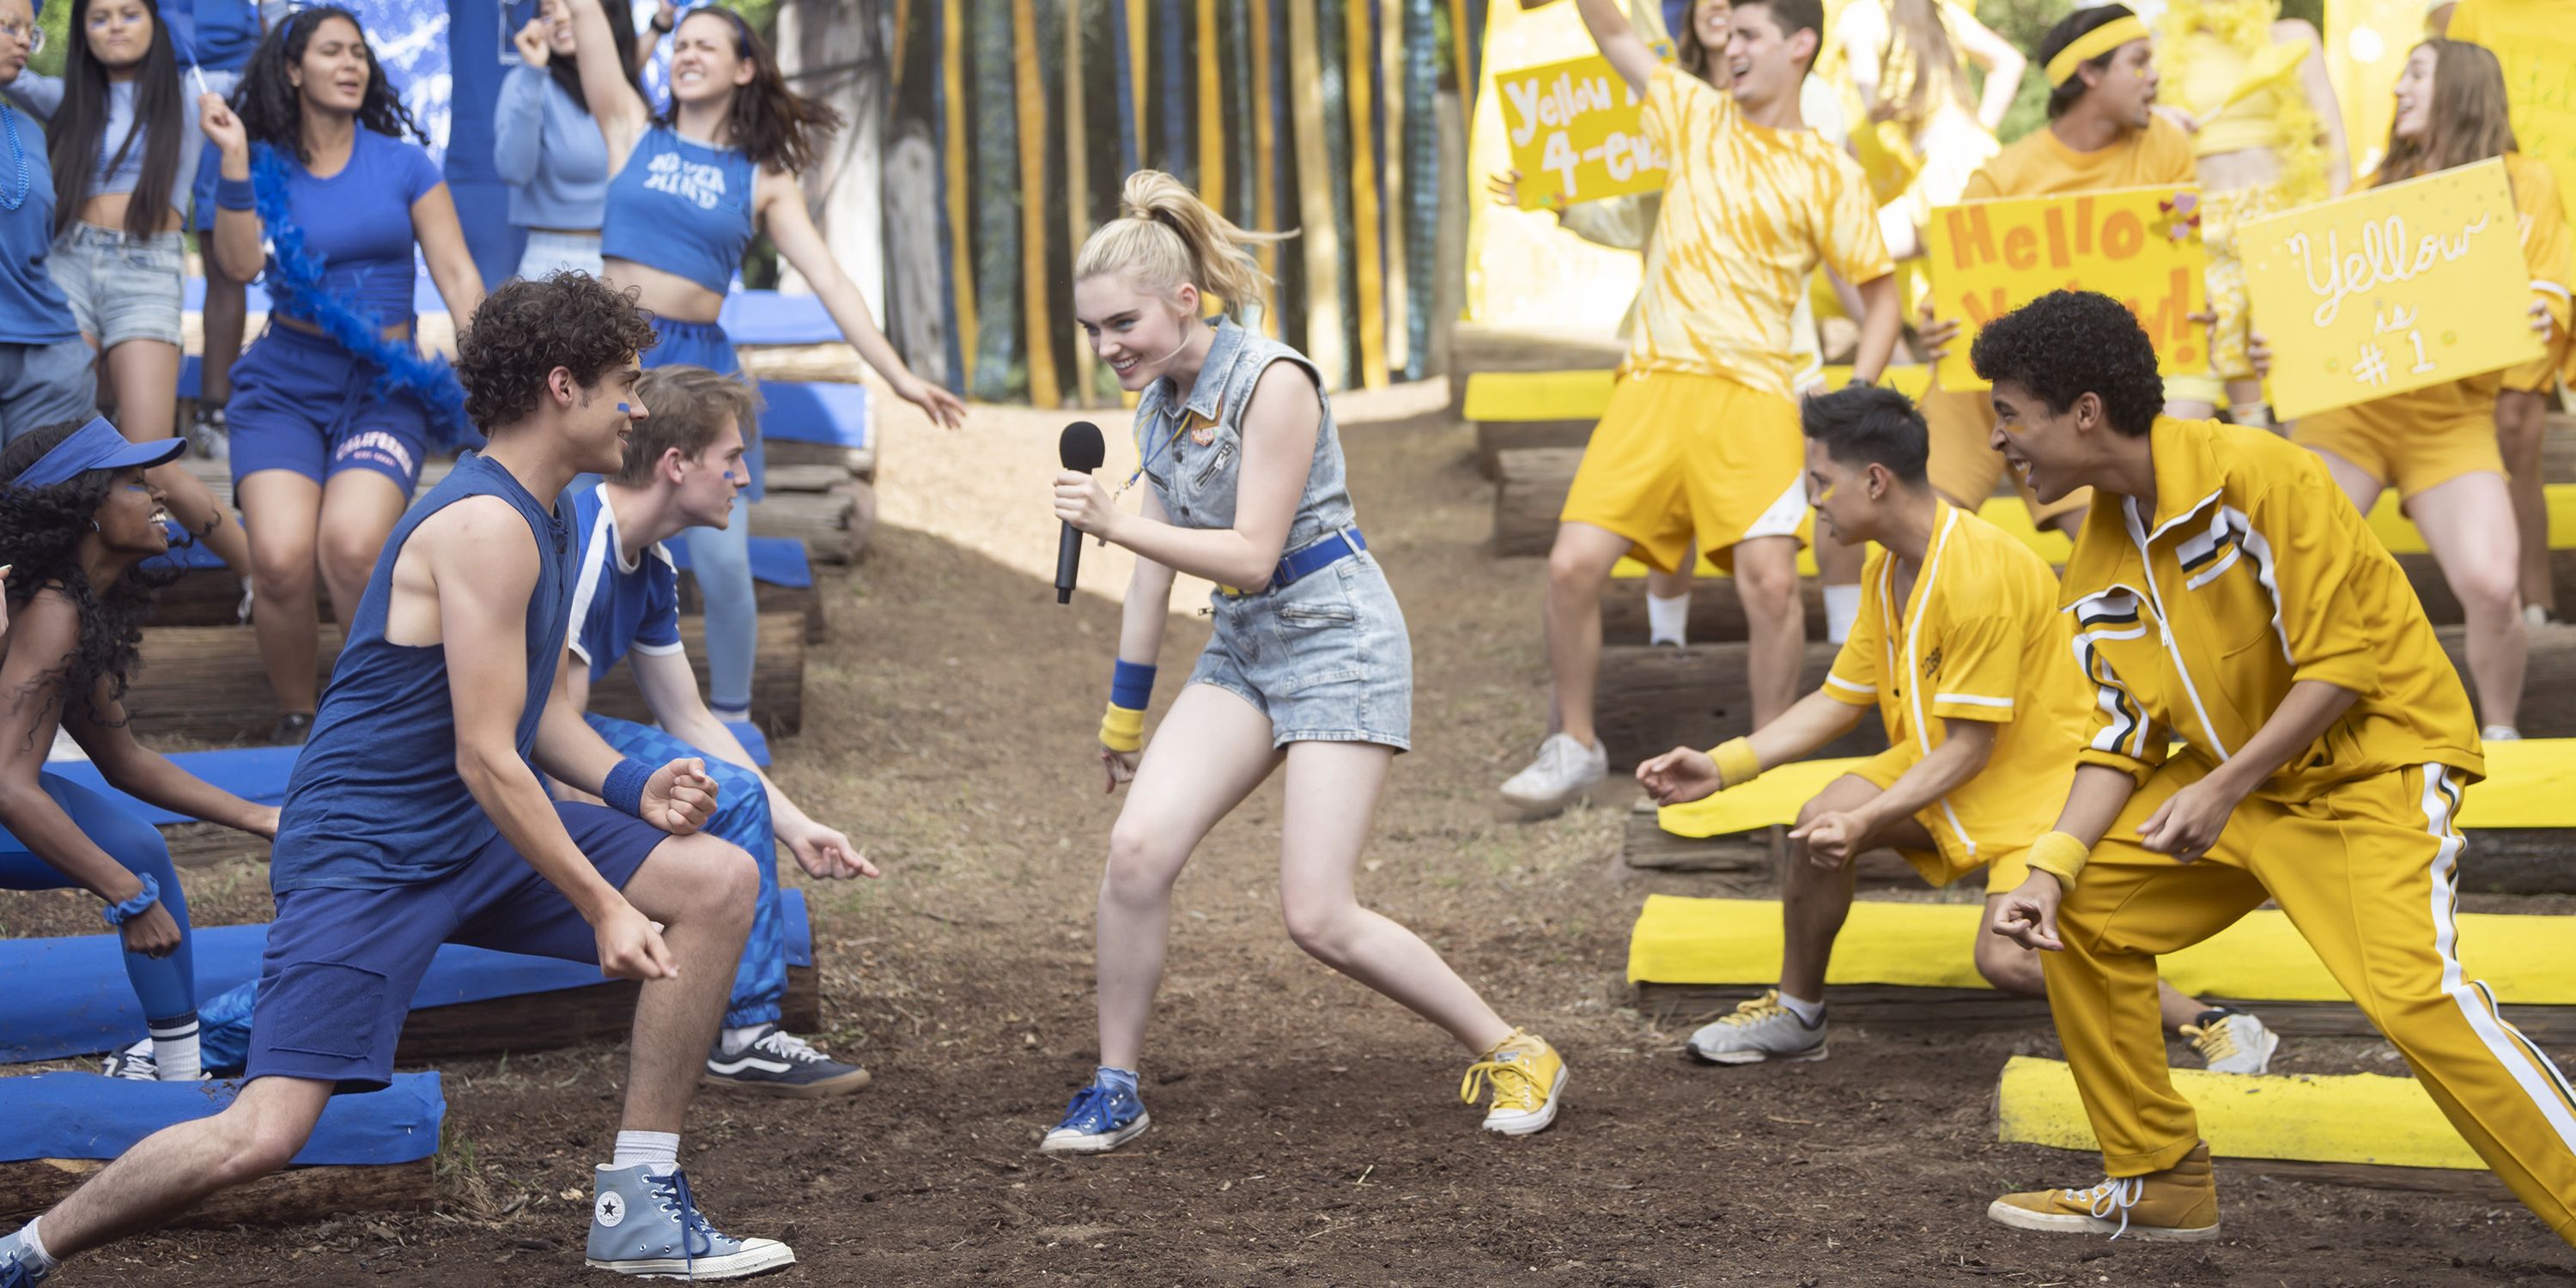 The blue team versus the yellow team in Season 3 of High School Musical: The Musical: The Series.